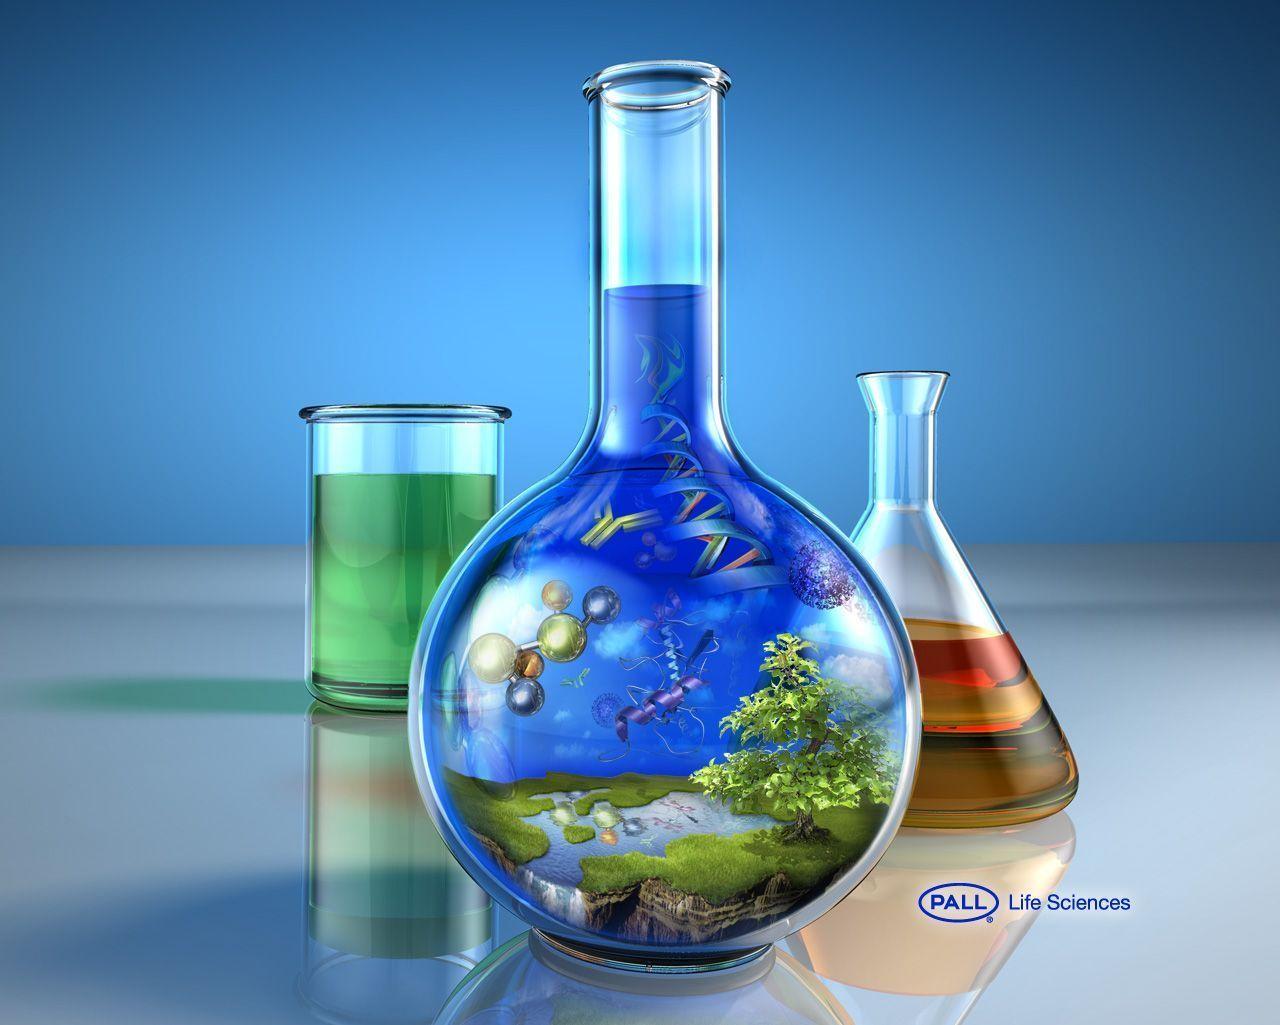 Laboratory Wallpaper Vector Images (over 5,200)